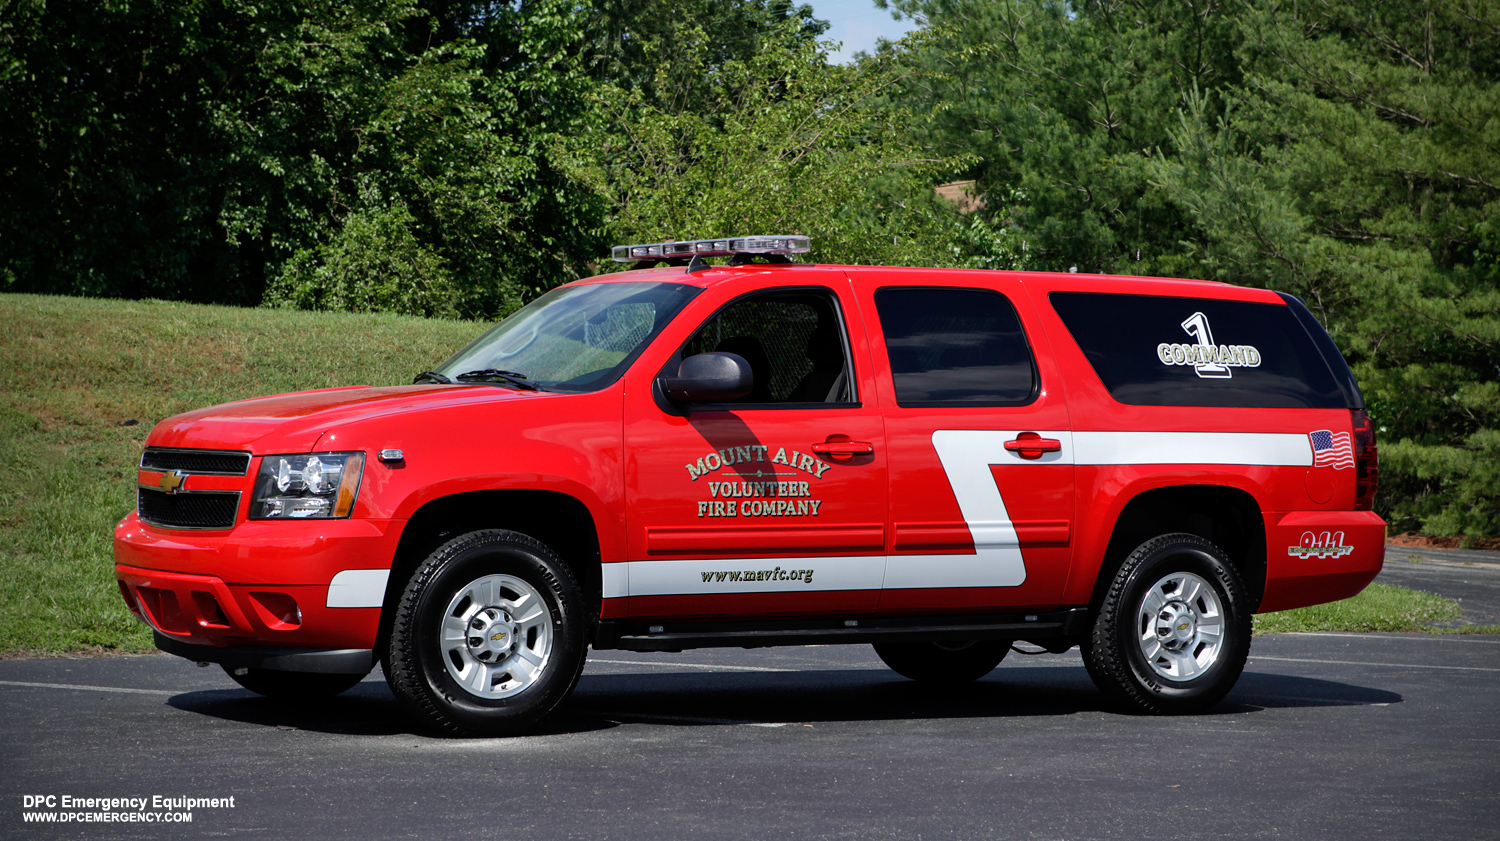 Featured image for “Mount Airy Volunteer Fire Company / DPC Command Unit”